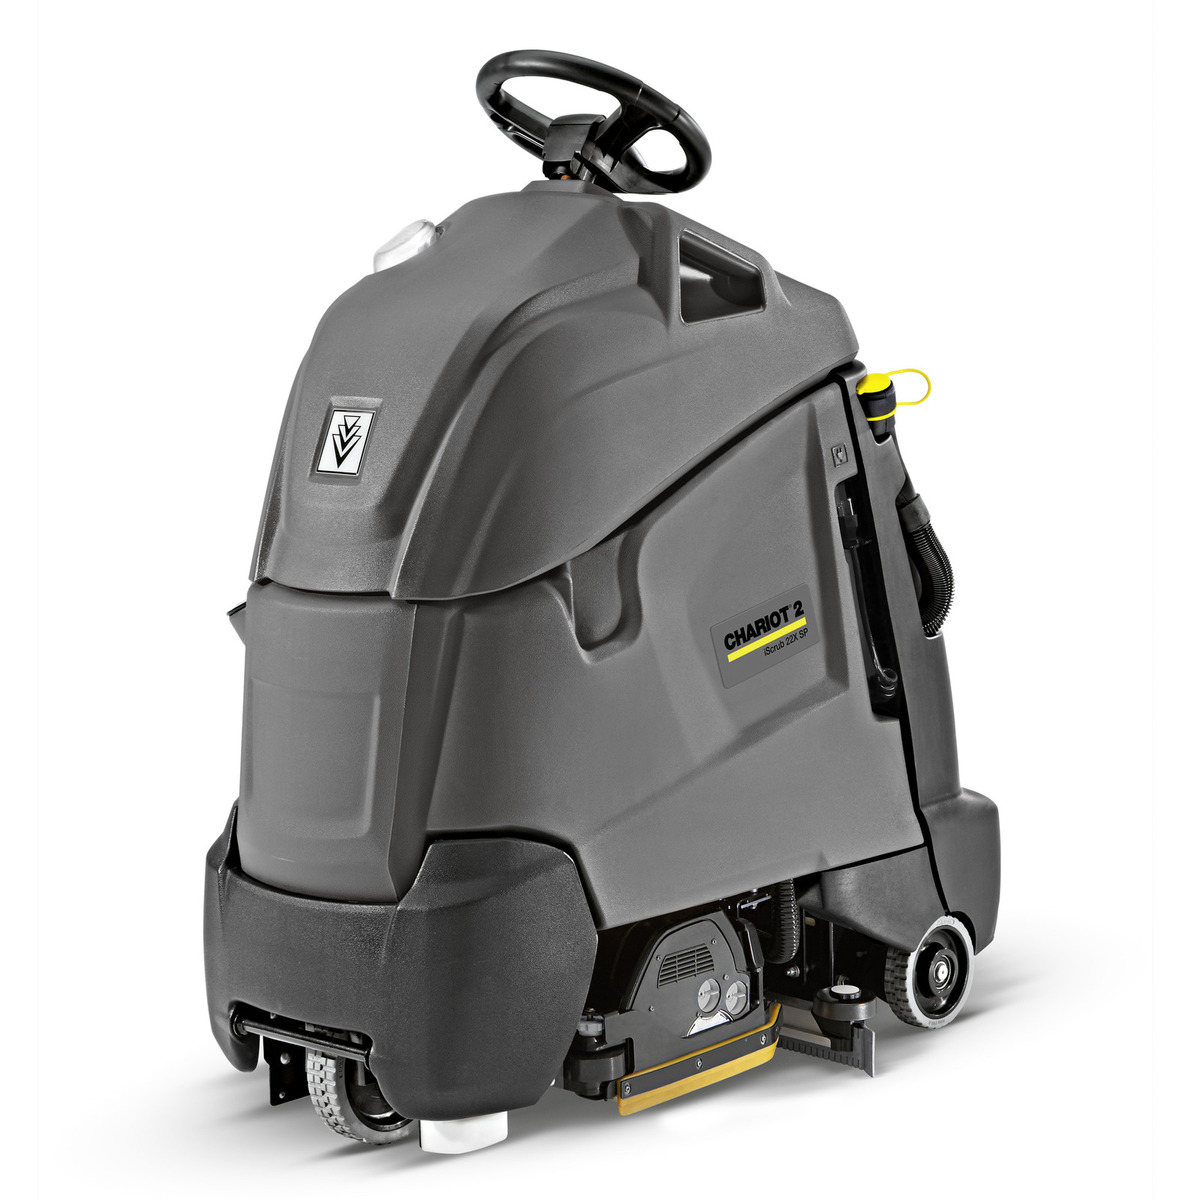 Chariot 2 iScrub 22 SP by Karcher  